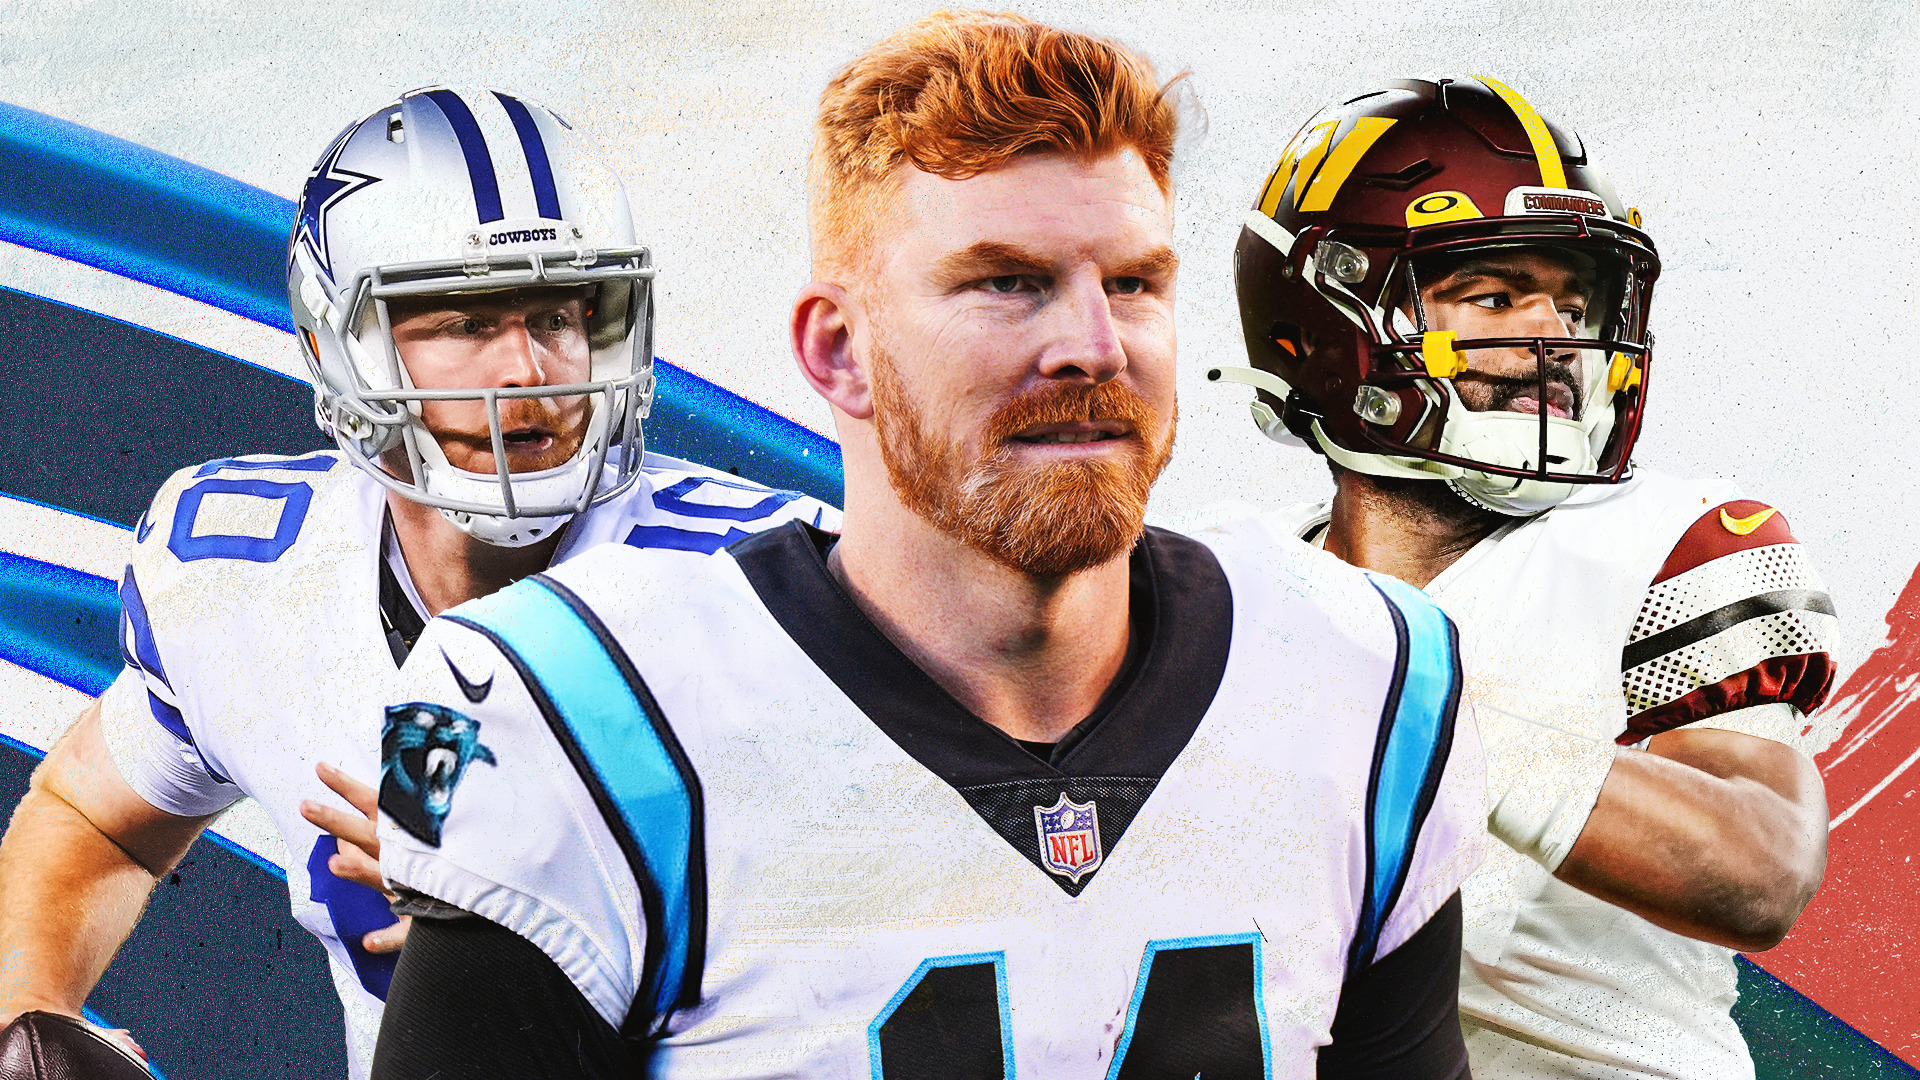 Ranking Top 10 Backup Quarterbacks Which NFL Team Is Most Prepared?